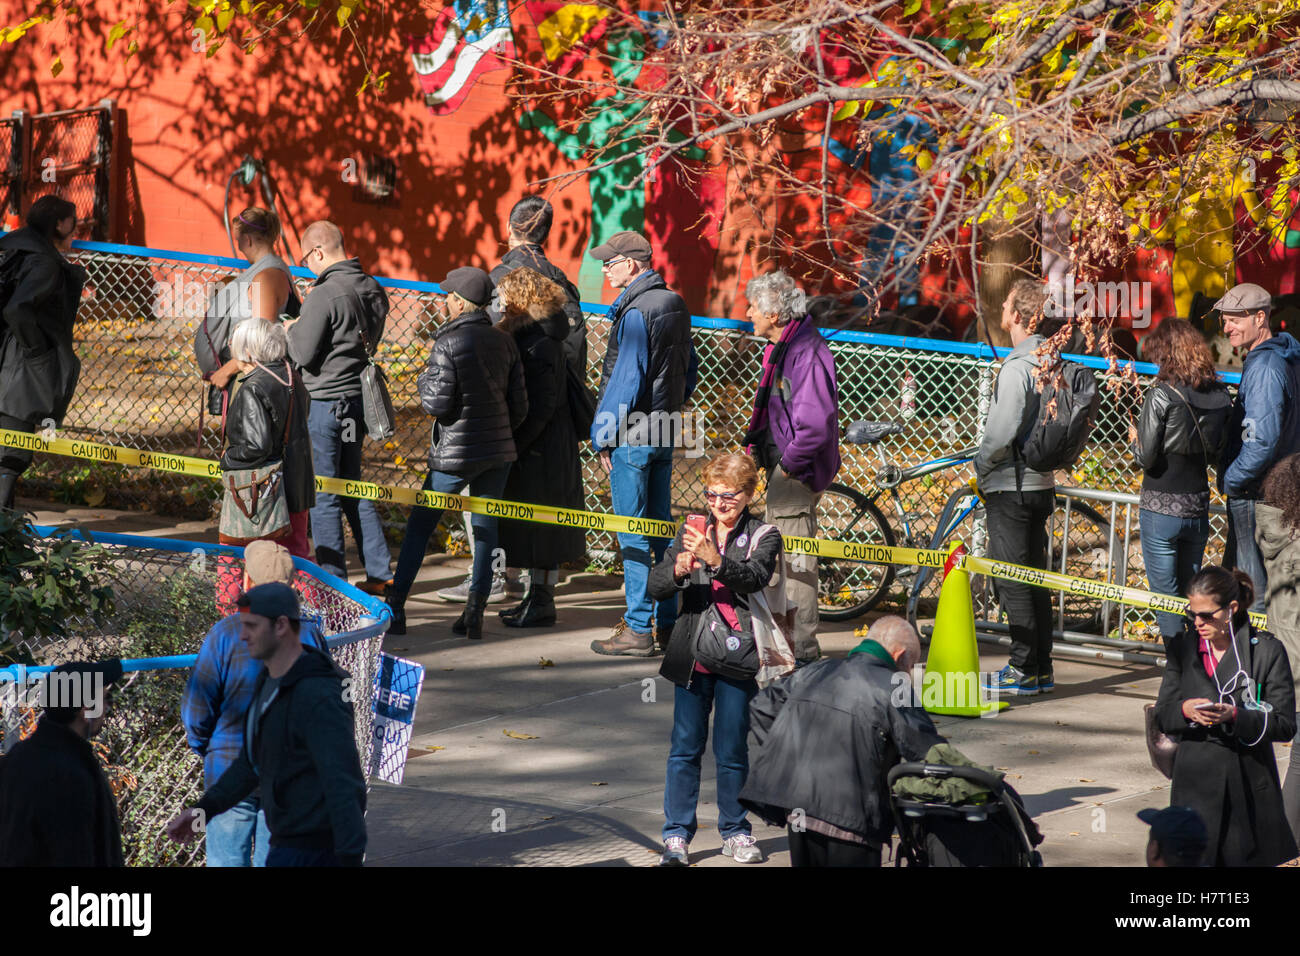 Hundreds of voters wait in line to enter the PS33 polling station in the Chelsea neighborhood of New York on Election Day, Tuesday, November 8, 2016. (© Richard B. Levine) Stock Photo